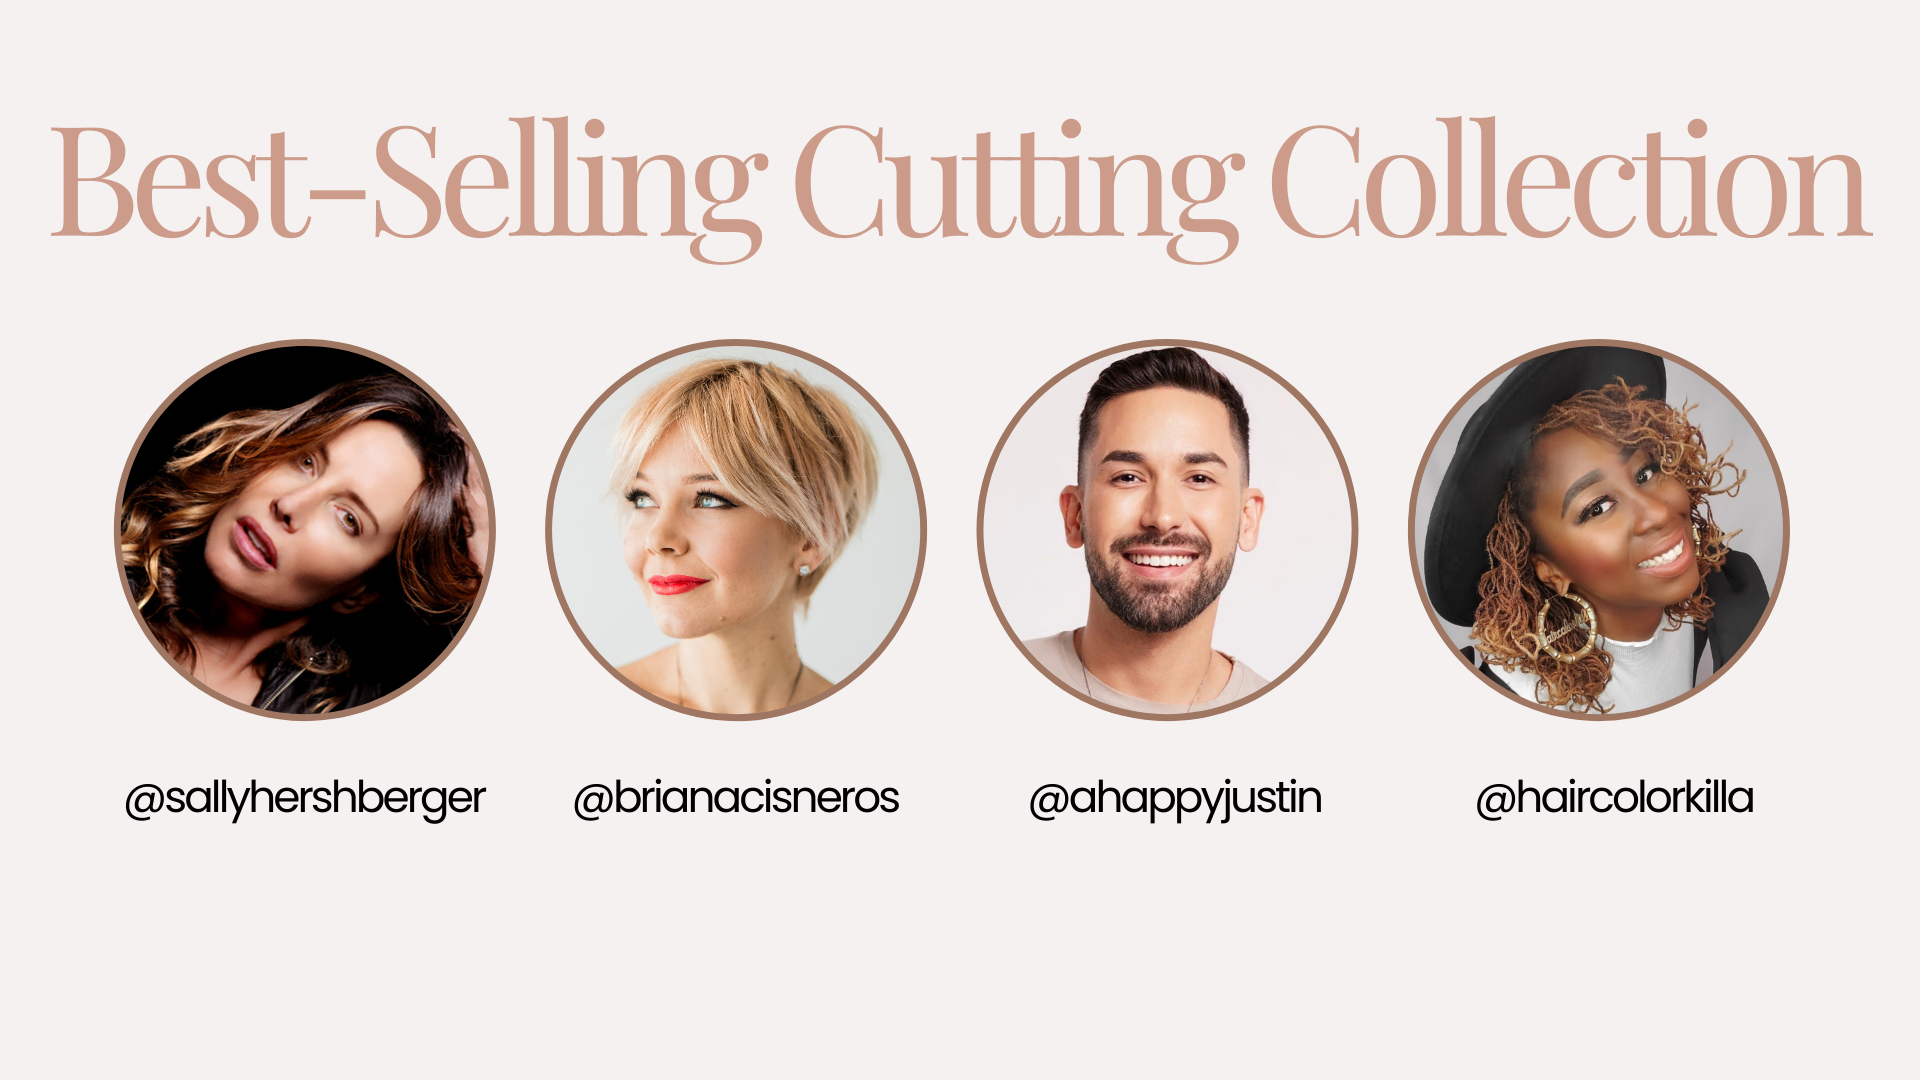 Best-Selling Cutting Collection